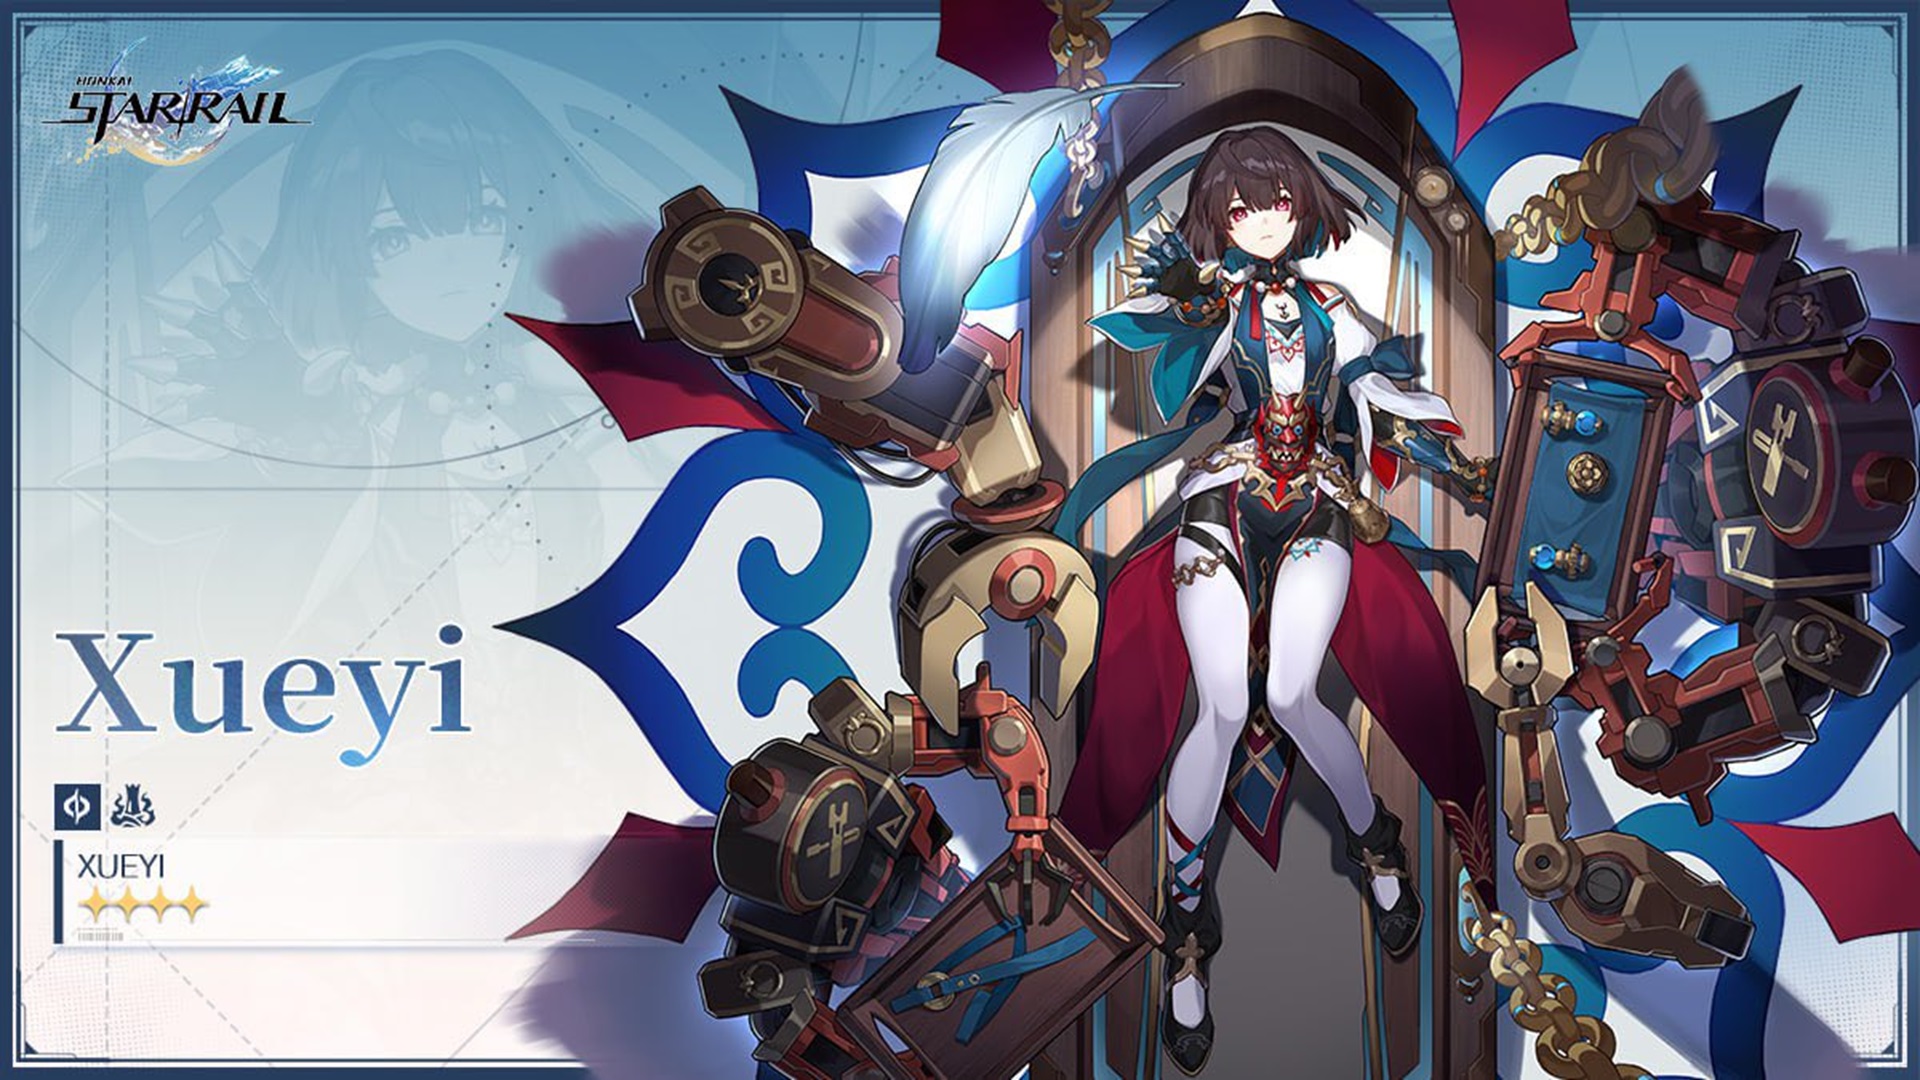 Honkai: Star Rail Characters Guide - Heroes List, Elements, Voice